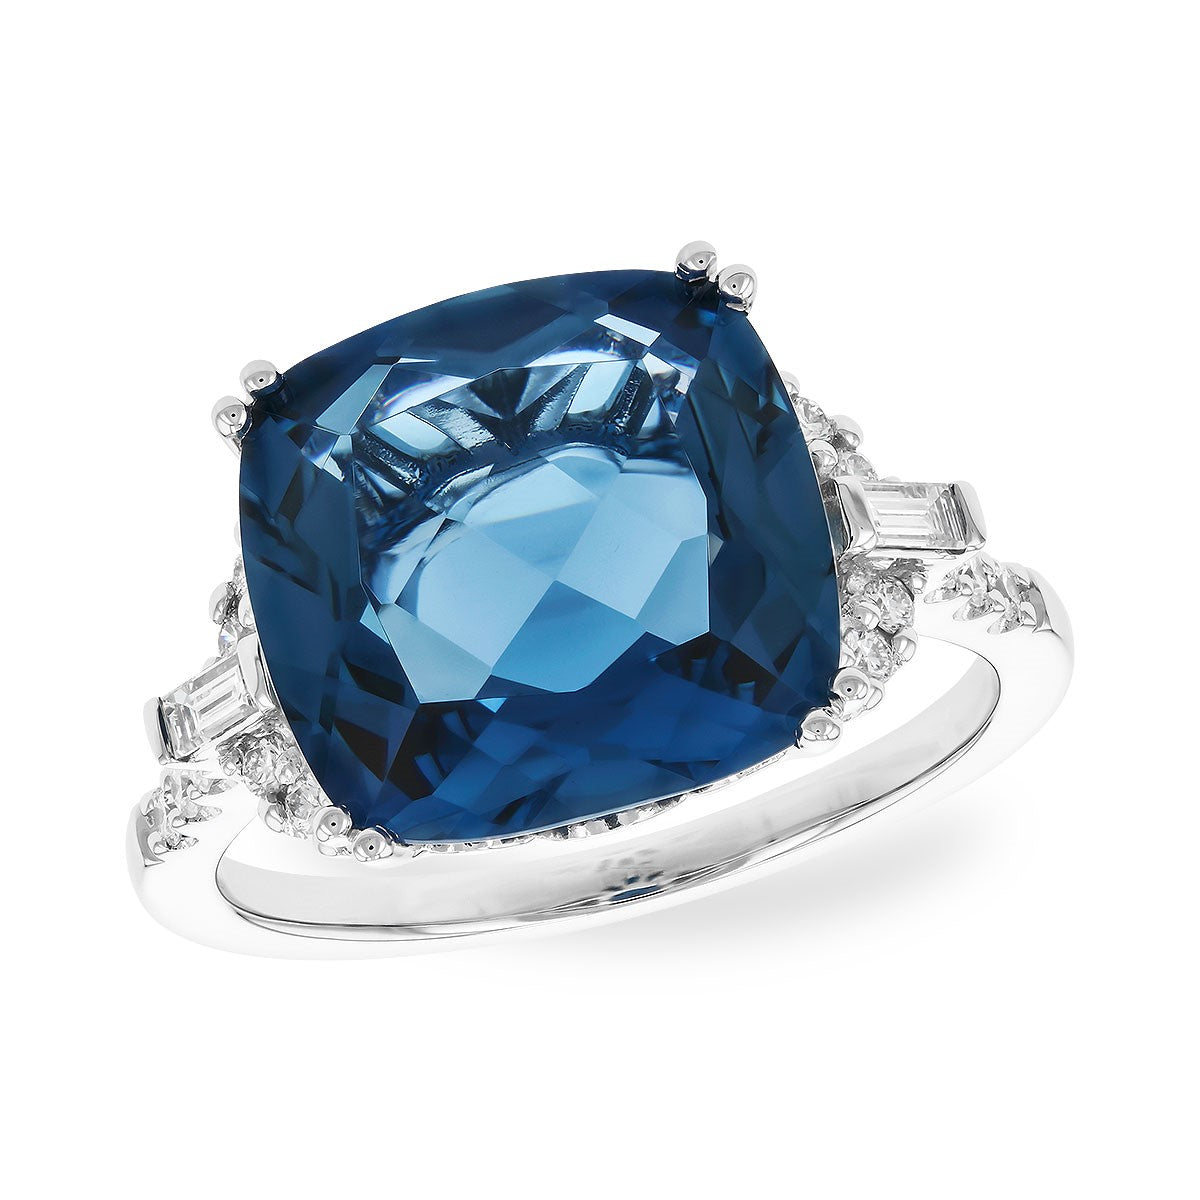 Amazon.com: Sdouefos 14K Gold Plated 925 Sterling Silver Square Cushion Cut  Gemstone Dark Blue Topaz Ring Statement Ring Navy Gemstone Ring - Choice of  Gemstone (US Code 8) : Arts, Crafts & Sewing